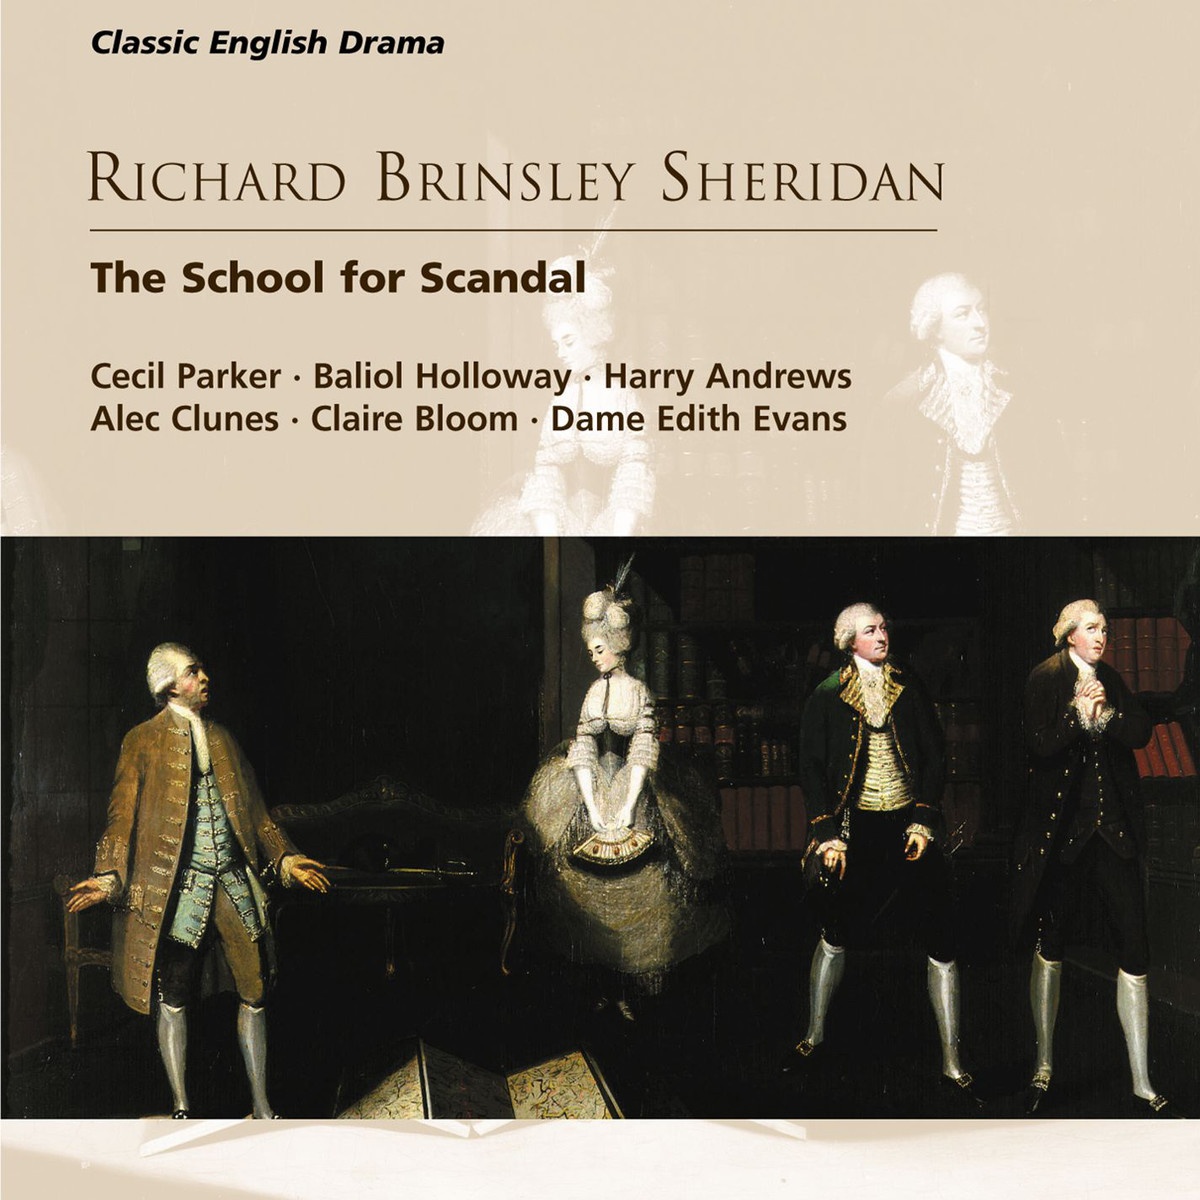 The School for Scandal - A comedy in five acts, Act V, Scene 3 (The library at Surface's): Ah, my old friend, Sir Oliver - hey!